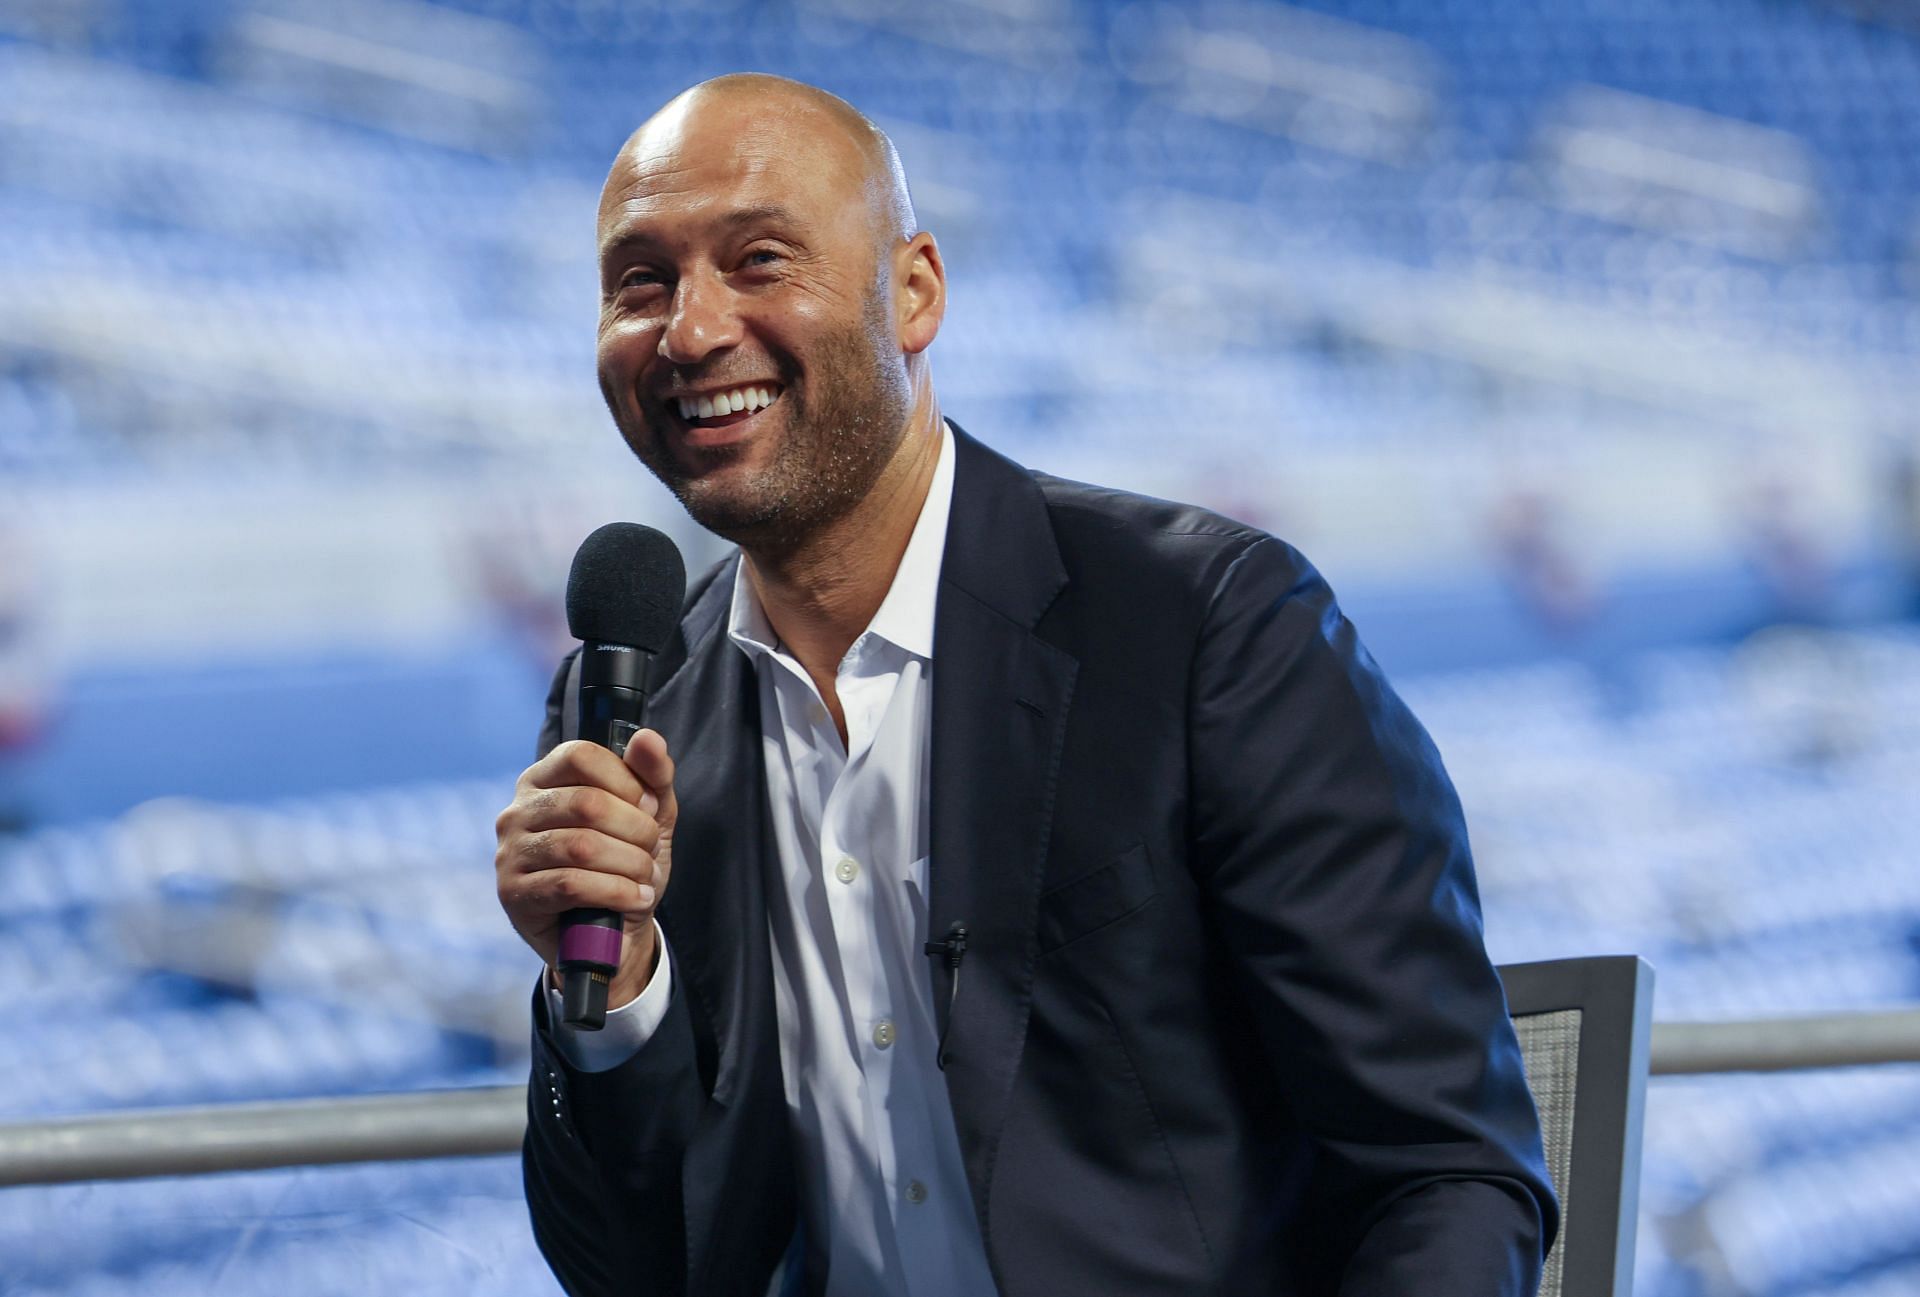 Derek Jeter opens up about state of the Yankees, fatherhood